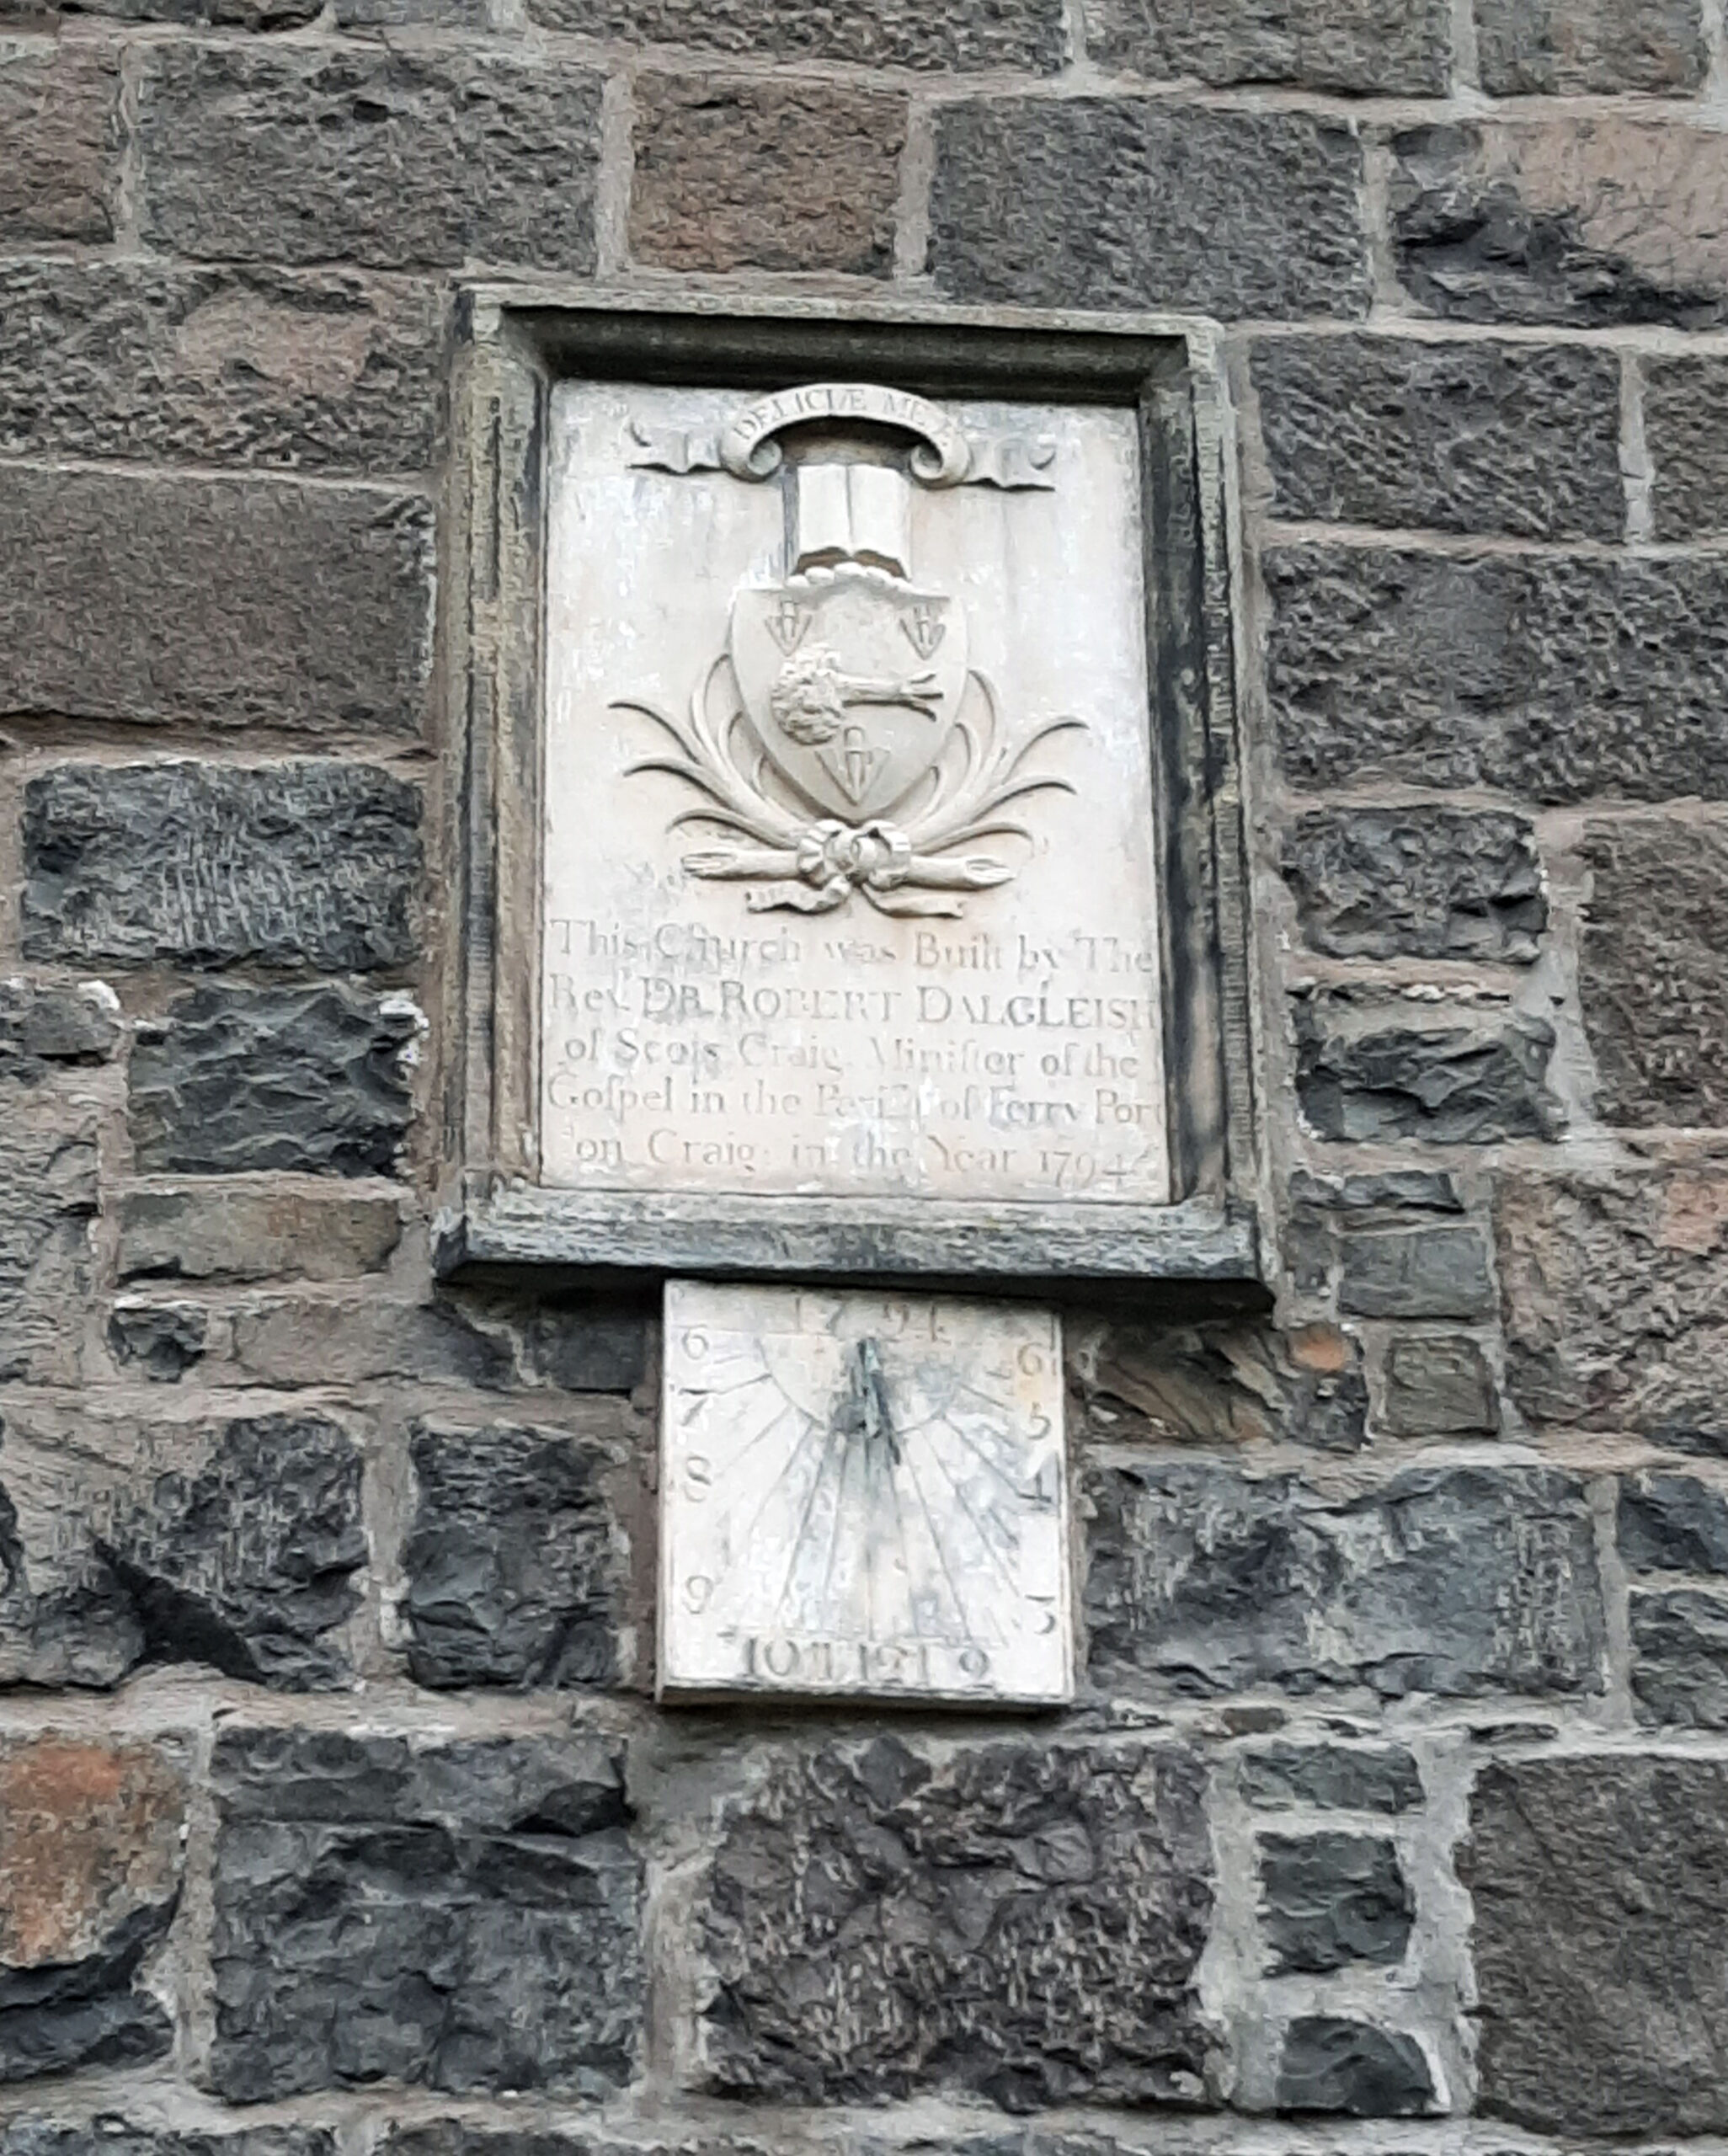 Tayport Heritage Trail - Board 23 - Dedication stone from the 1794 building relocated onto organ extension circa 1890s (Rev. Dr. Robert Dalgleish of Scotscraig – minister of parish 1794)